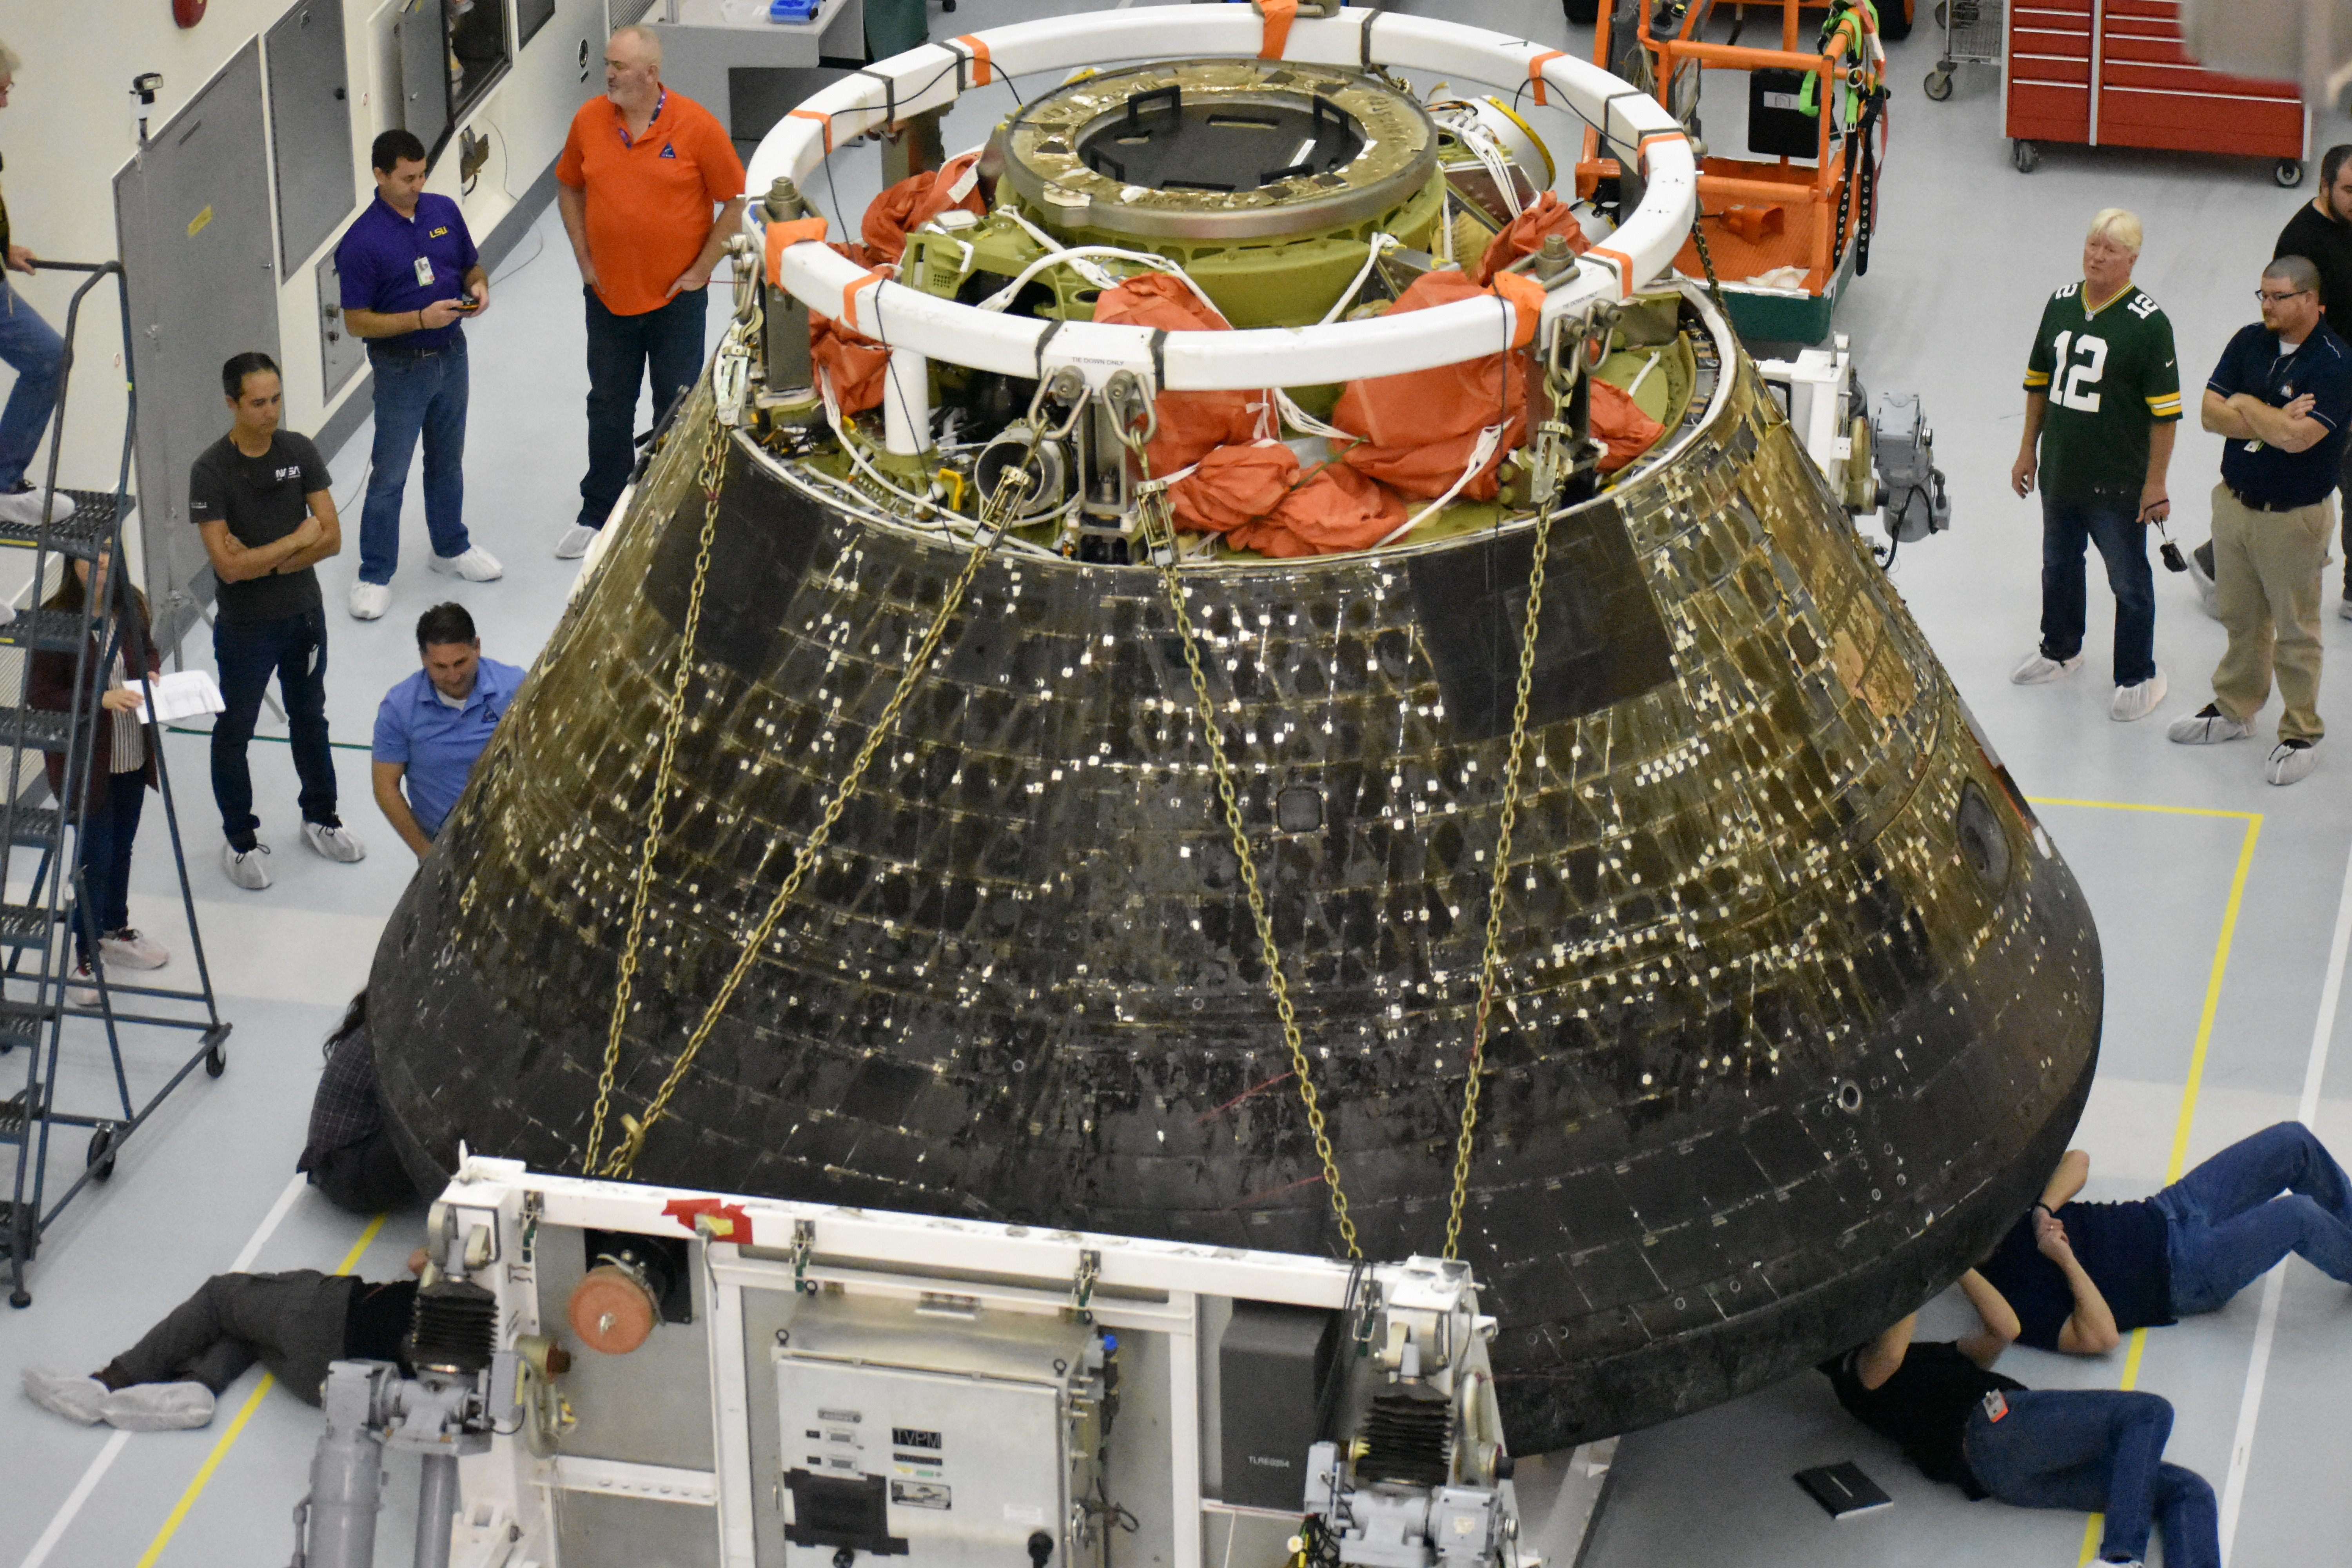 Technicians inspect the heat shield of the Artemis 1 Orion spacecraft at NASA's Kennedy Space Center in Florida.  Photo released January 6, 2023.